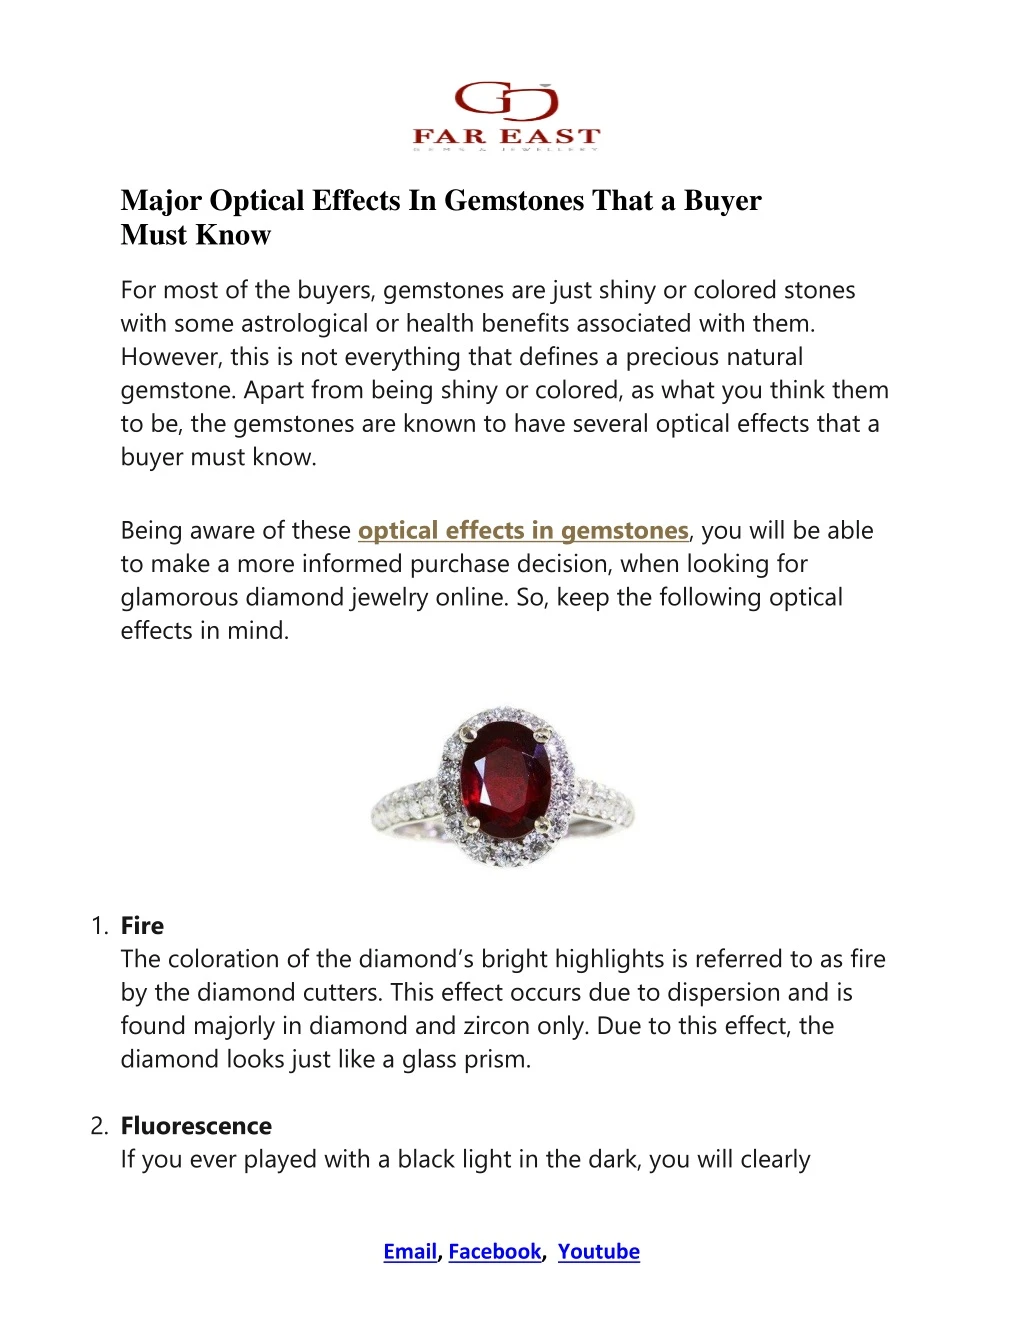 major optical effects in gemstones that a buyer